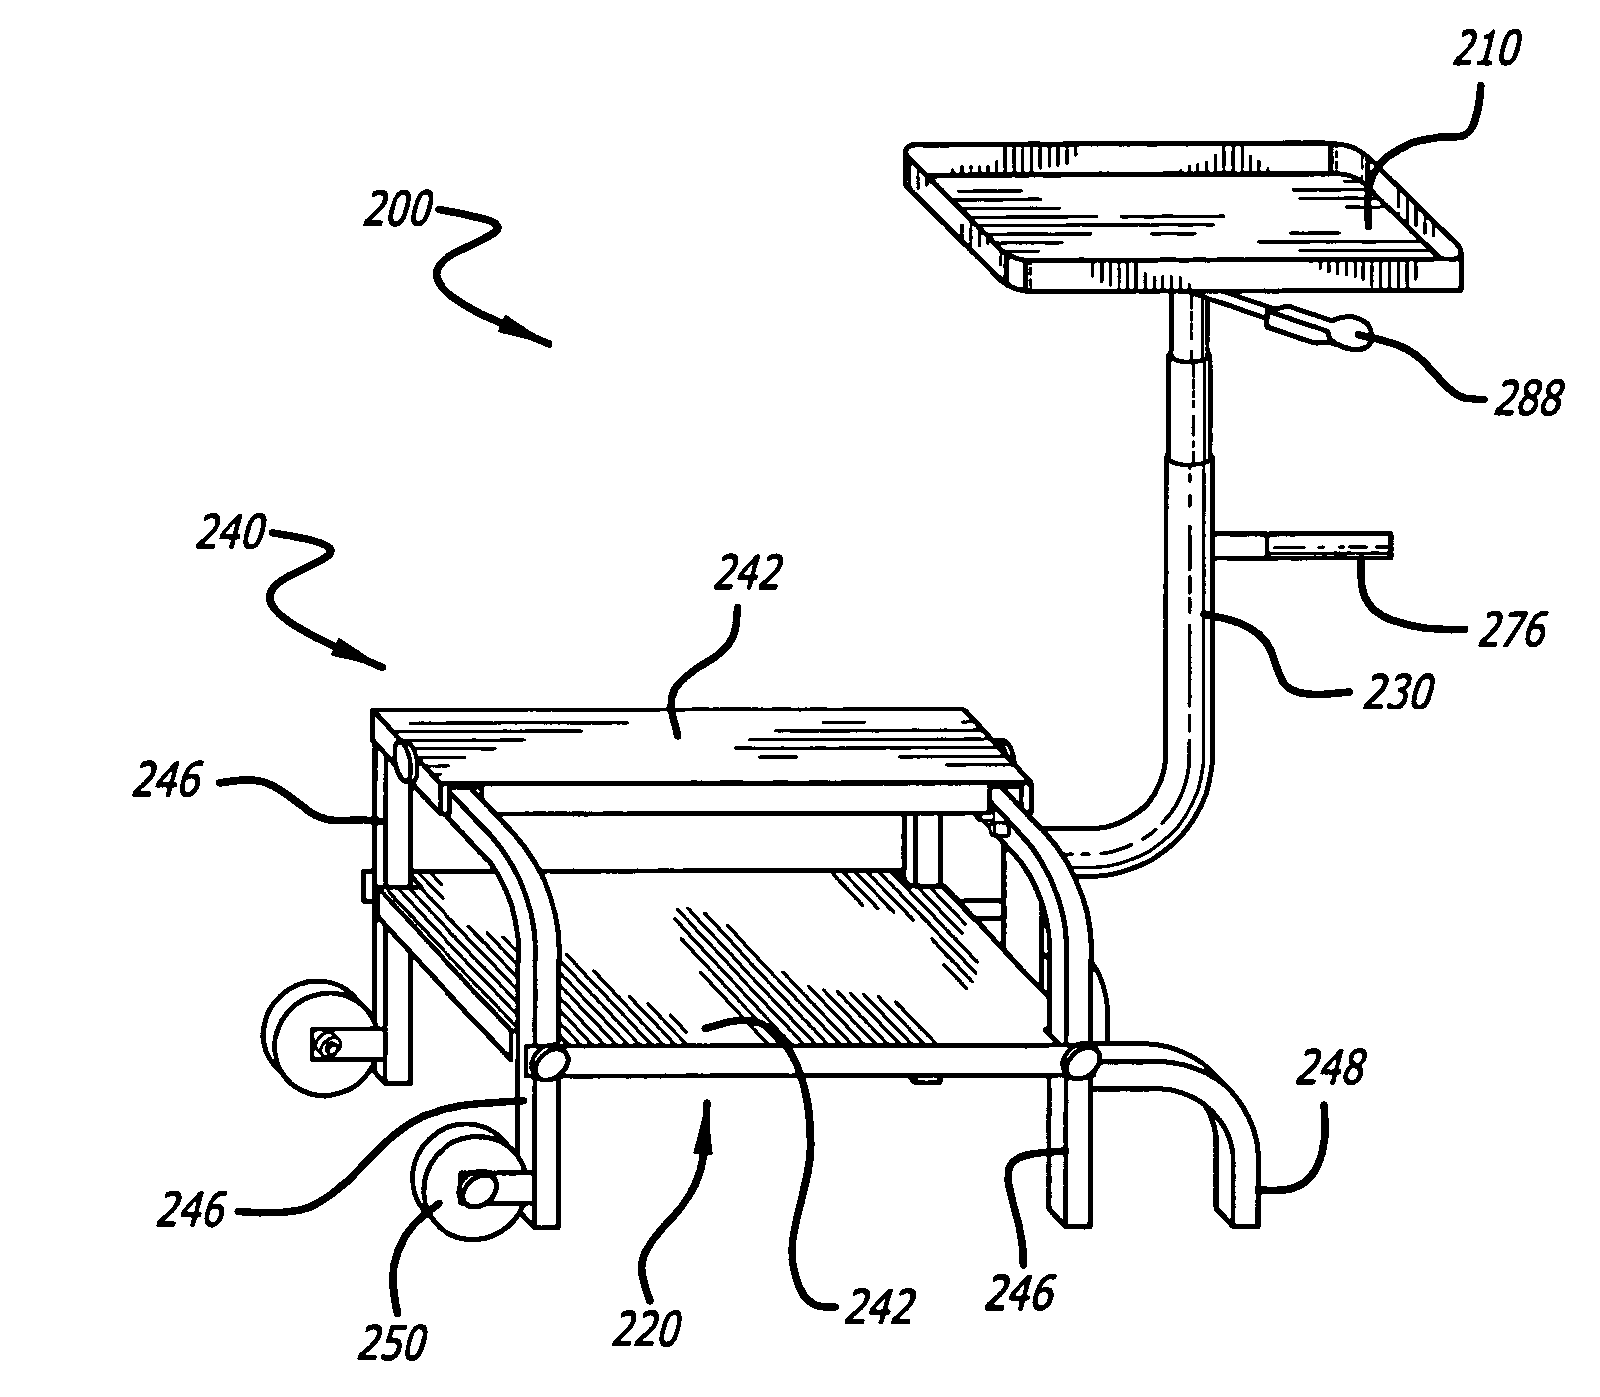 Pneumatic table assembly